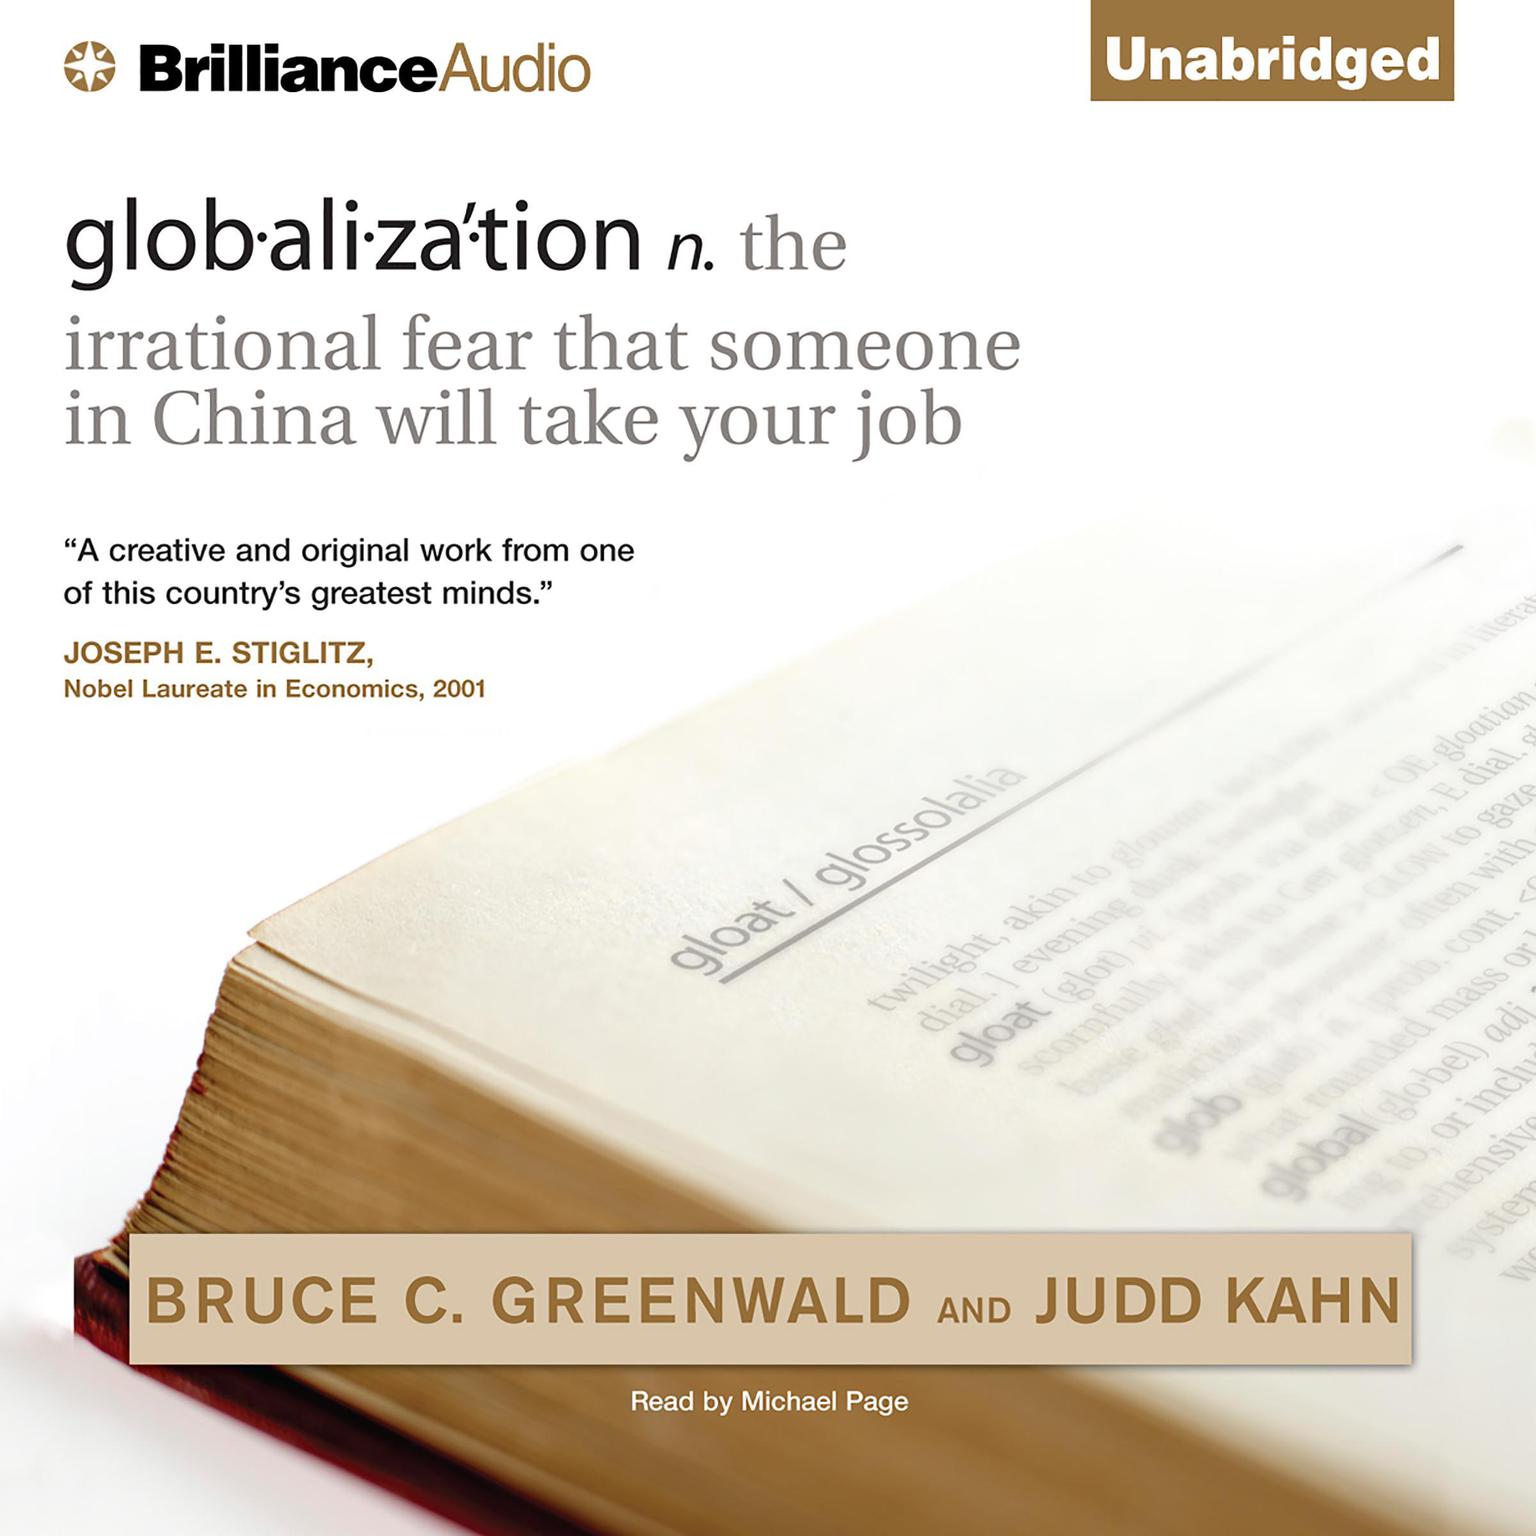 globalization: n. the irrational fear that someone in China will take your job Audiobook, by Bruce C. Greenwald